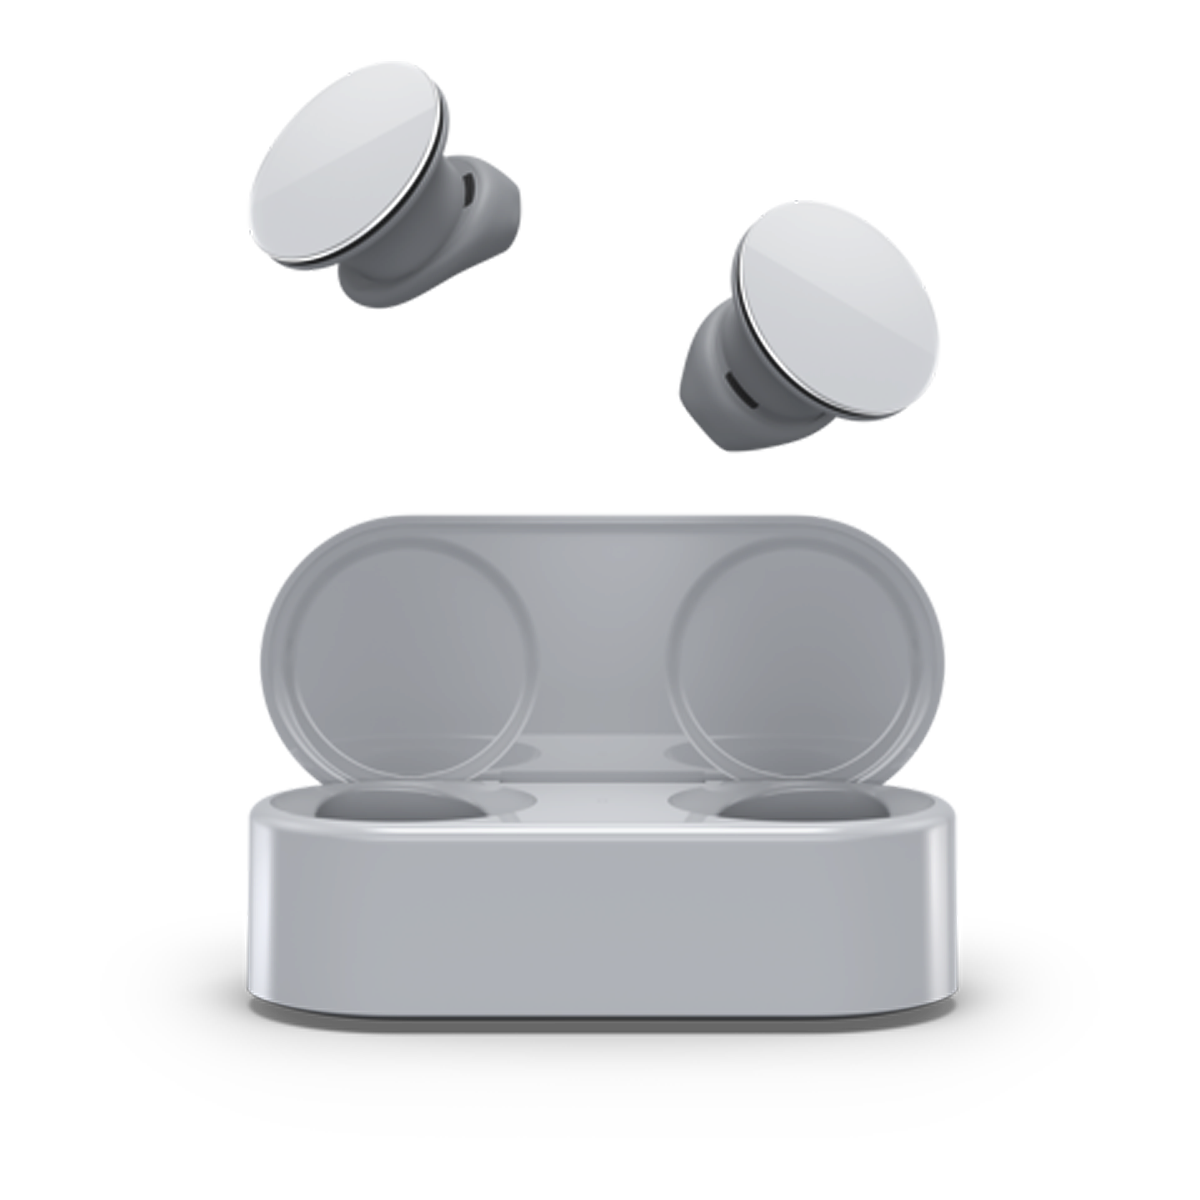 New Microsoft Surface Earbuds